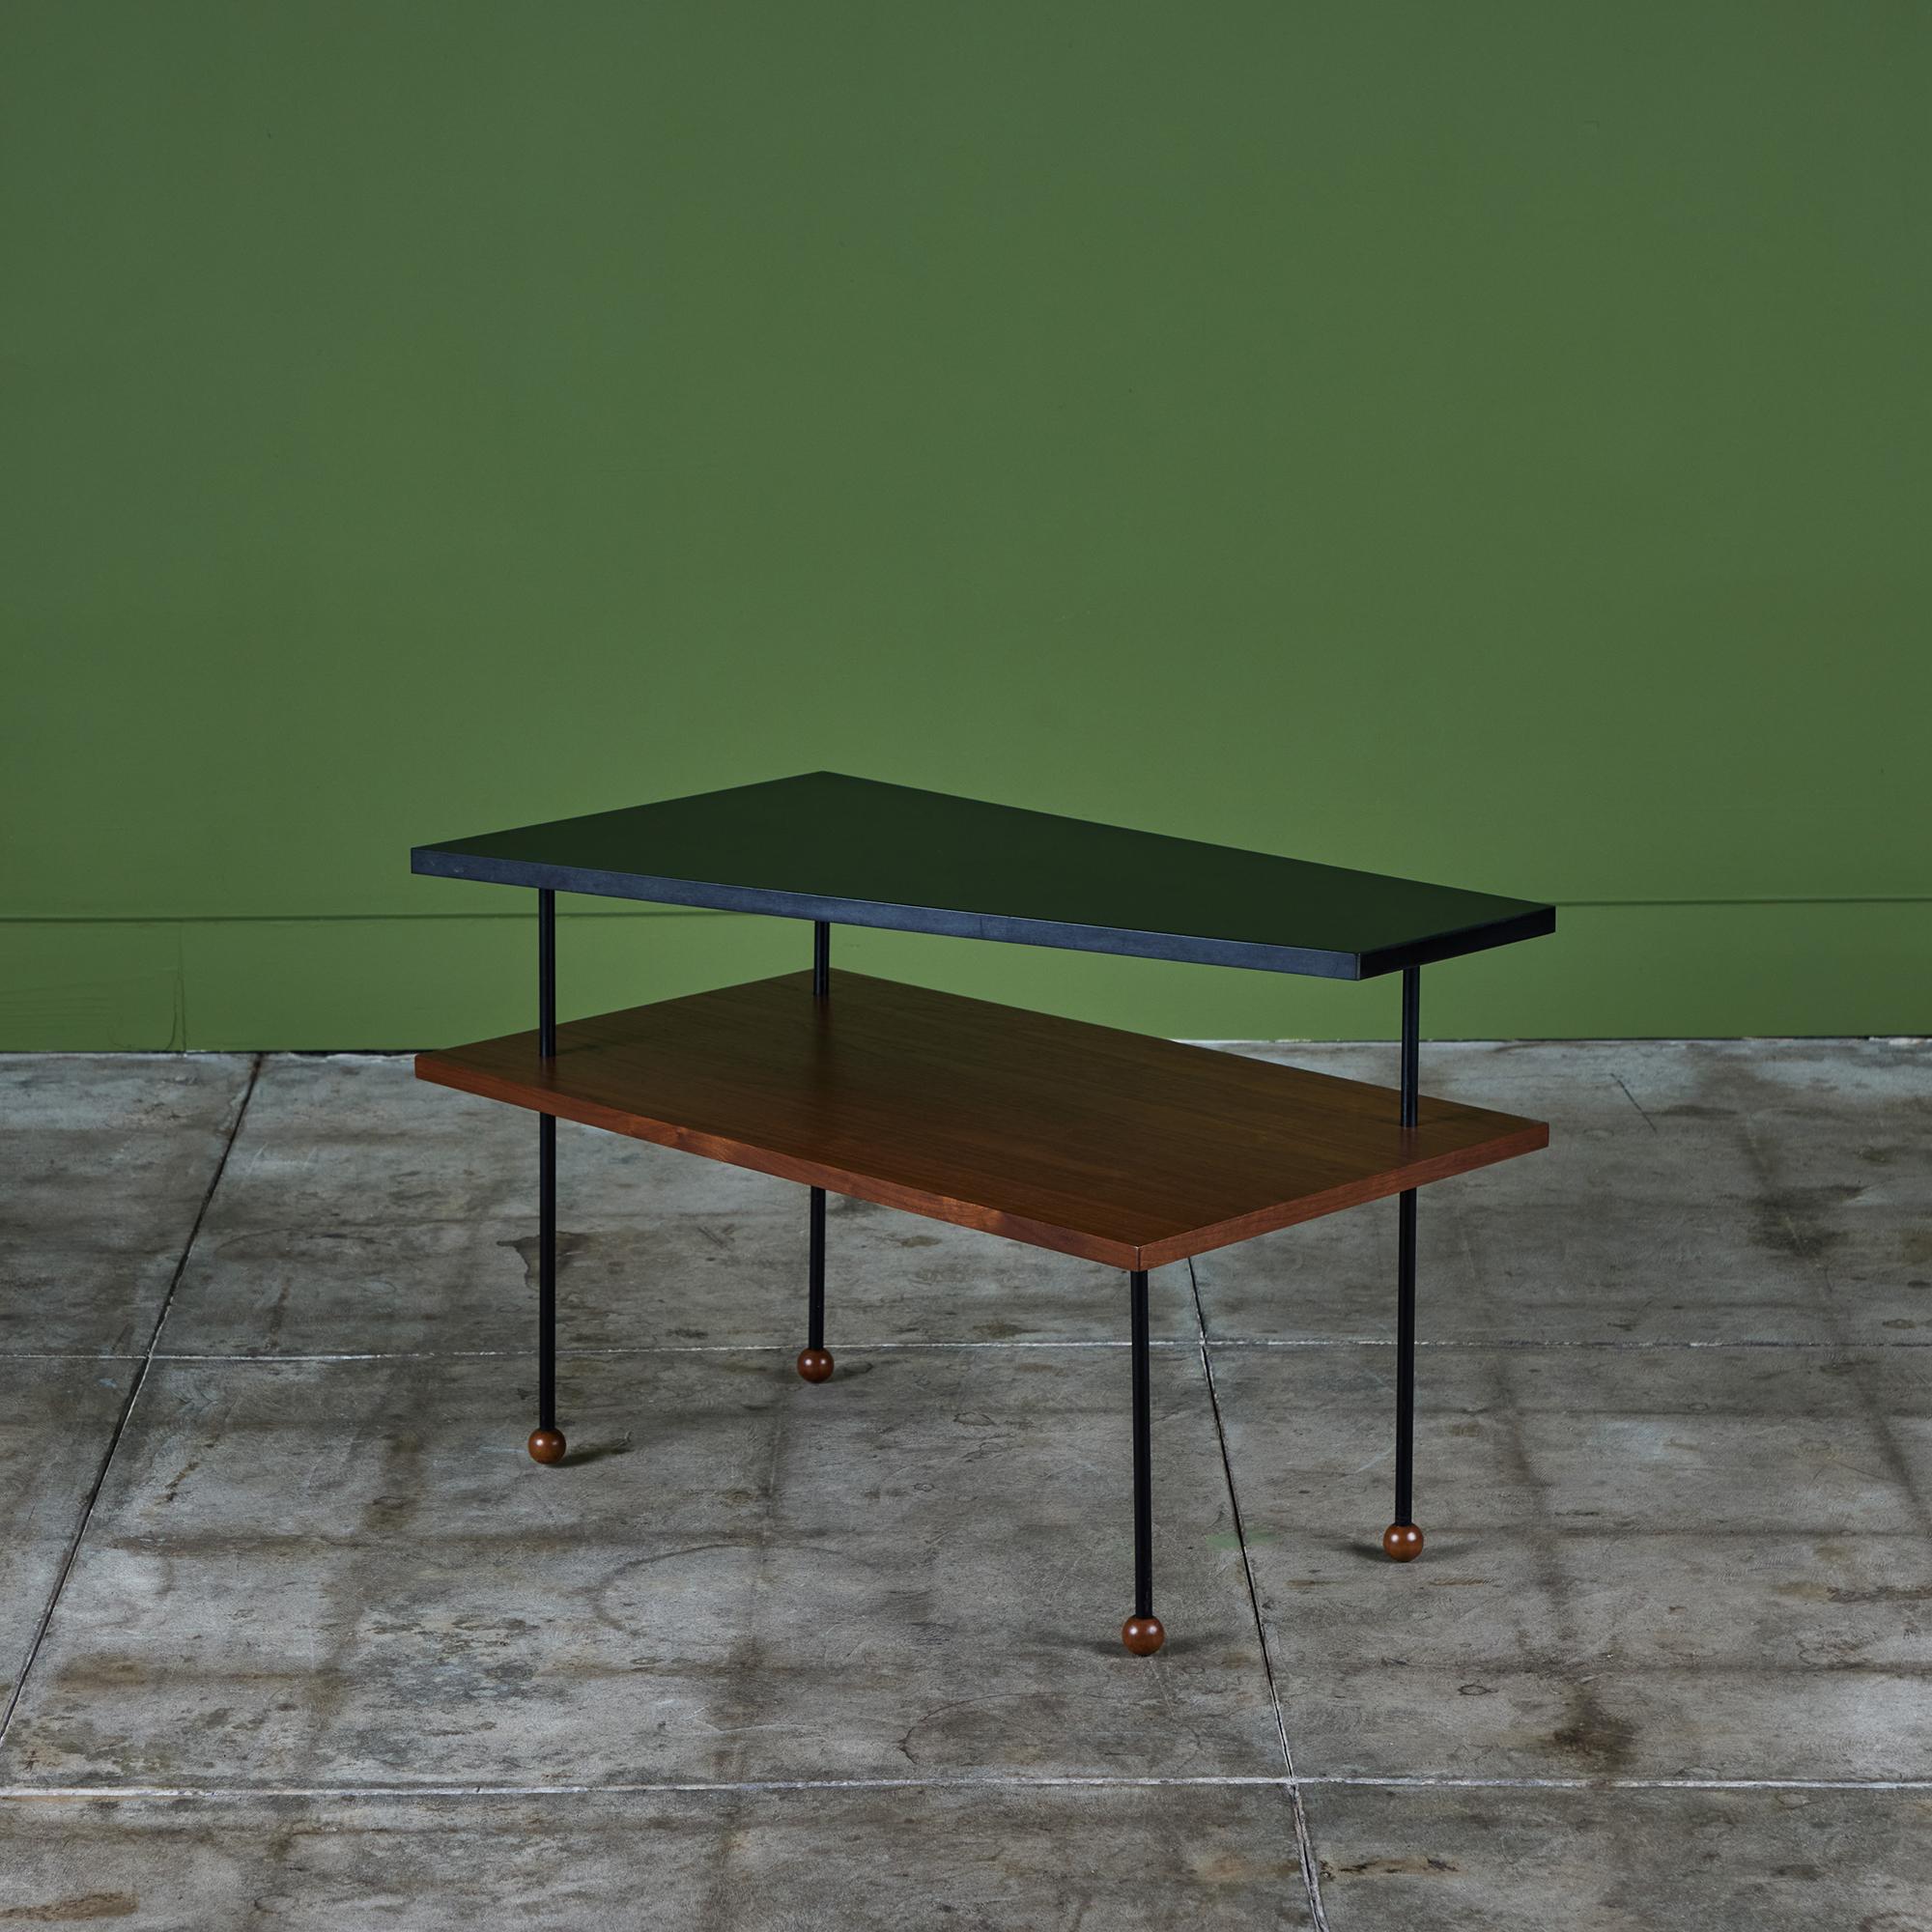 Rare Greta Grossman side table for Glenn of California, c.1950s. The table features an asymmetrical black laminate shelf that sits atop a rectangular walnut shelf. The shelves are held together by four thin painted metal stems with wooden ball feet.